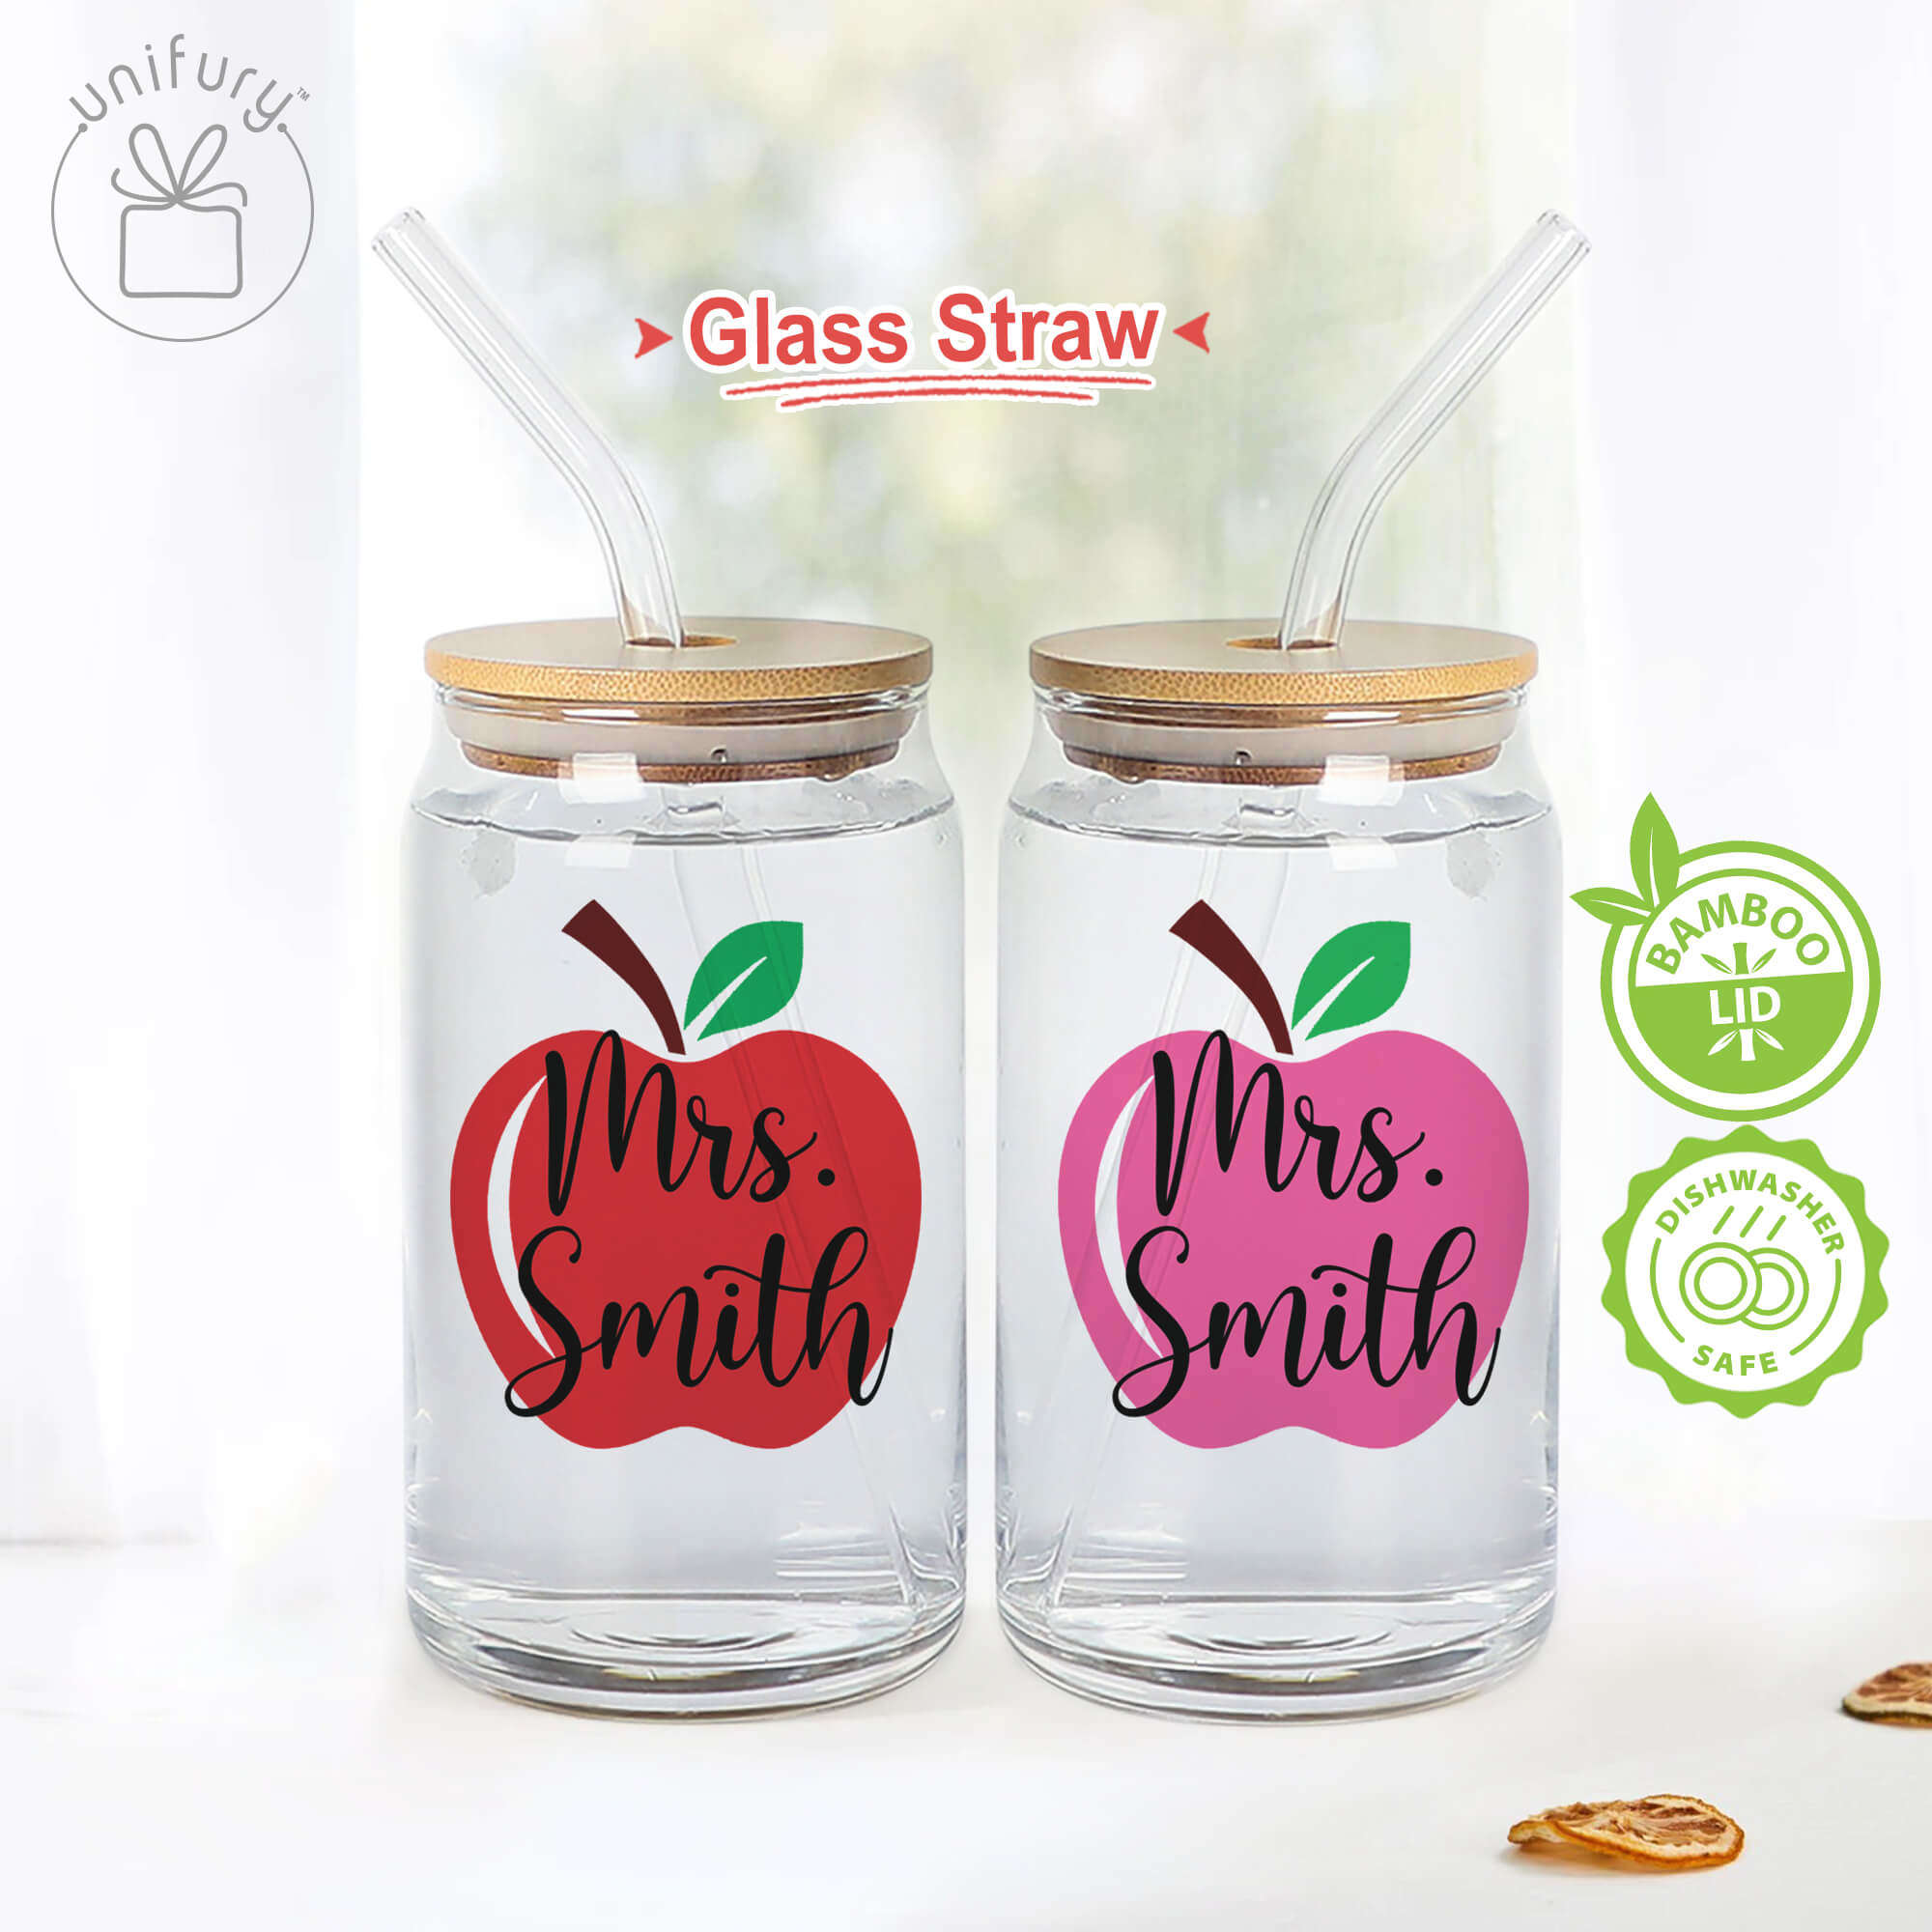 Personalized Teacher Clear Glass Tumbler, Pencil Coffee Cup - Unifury